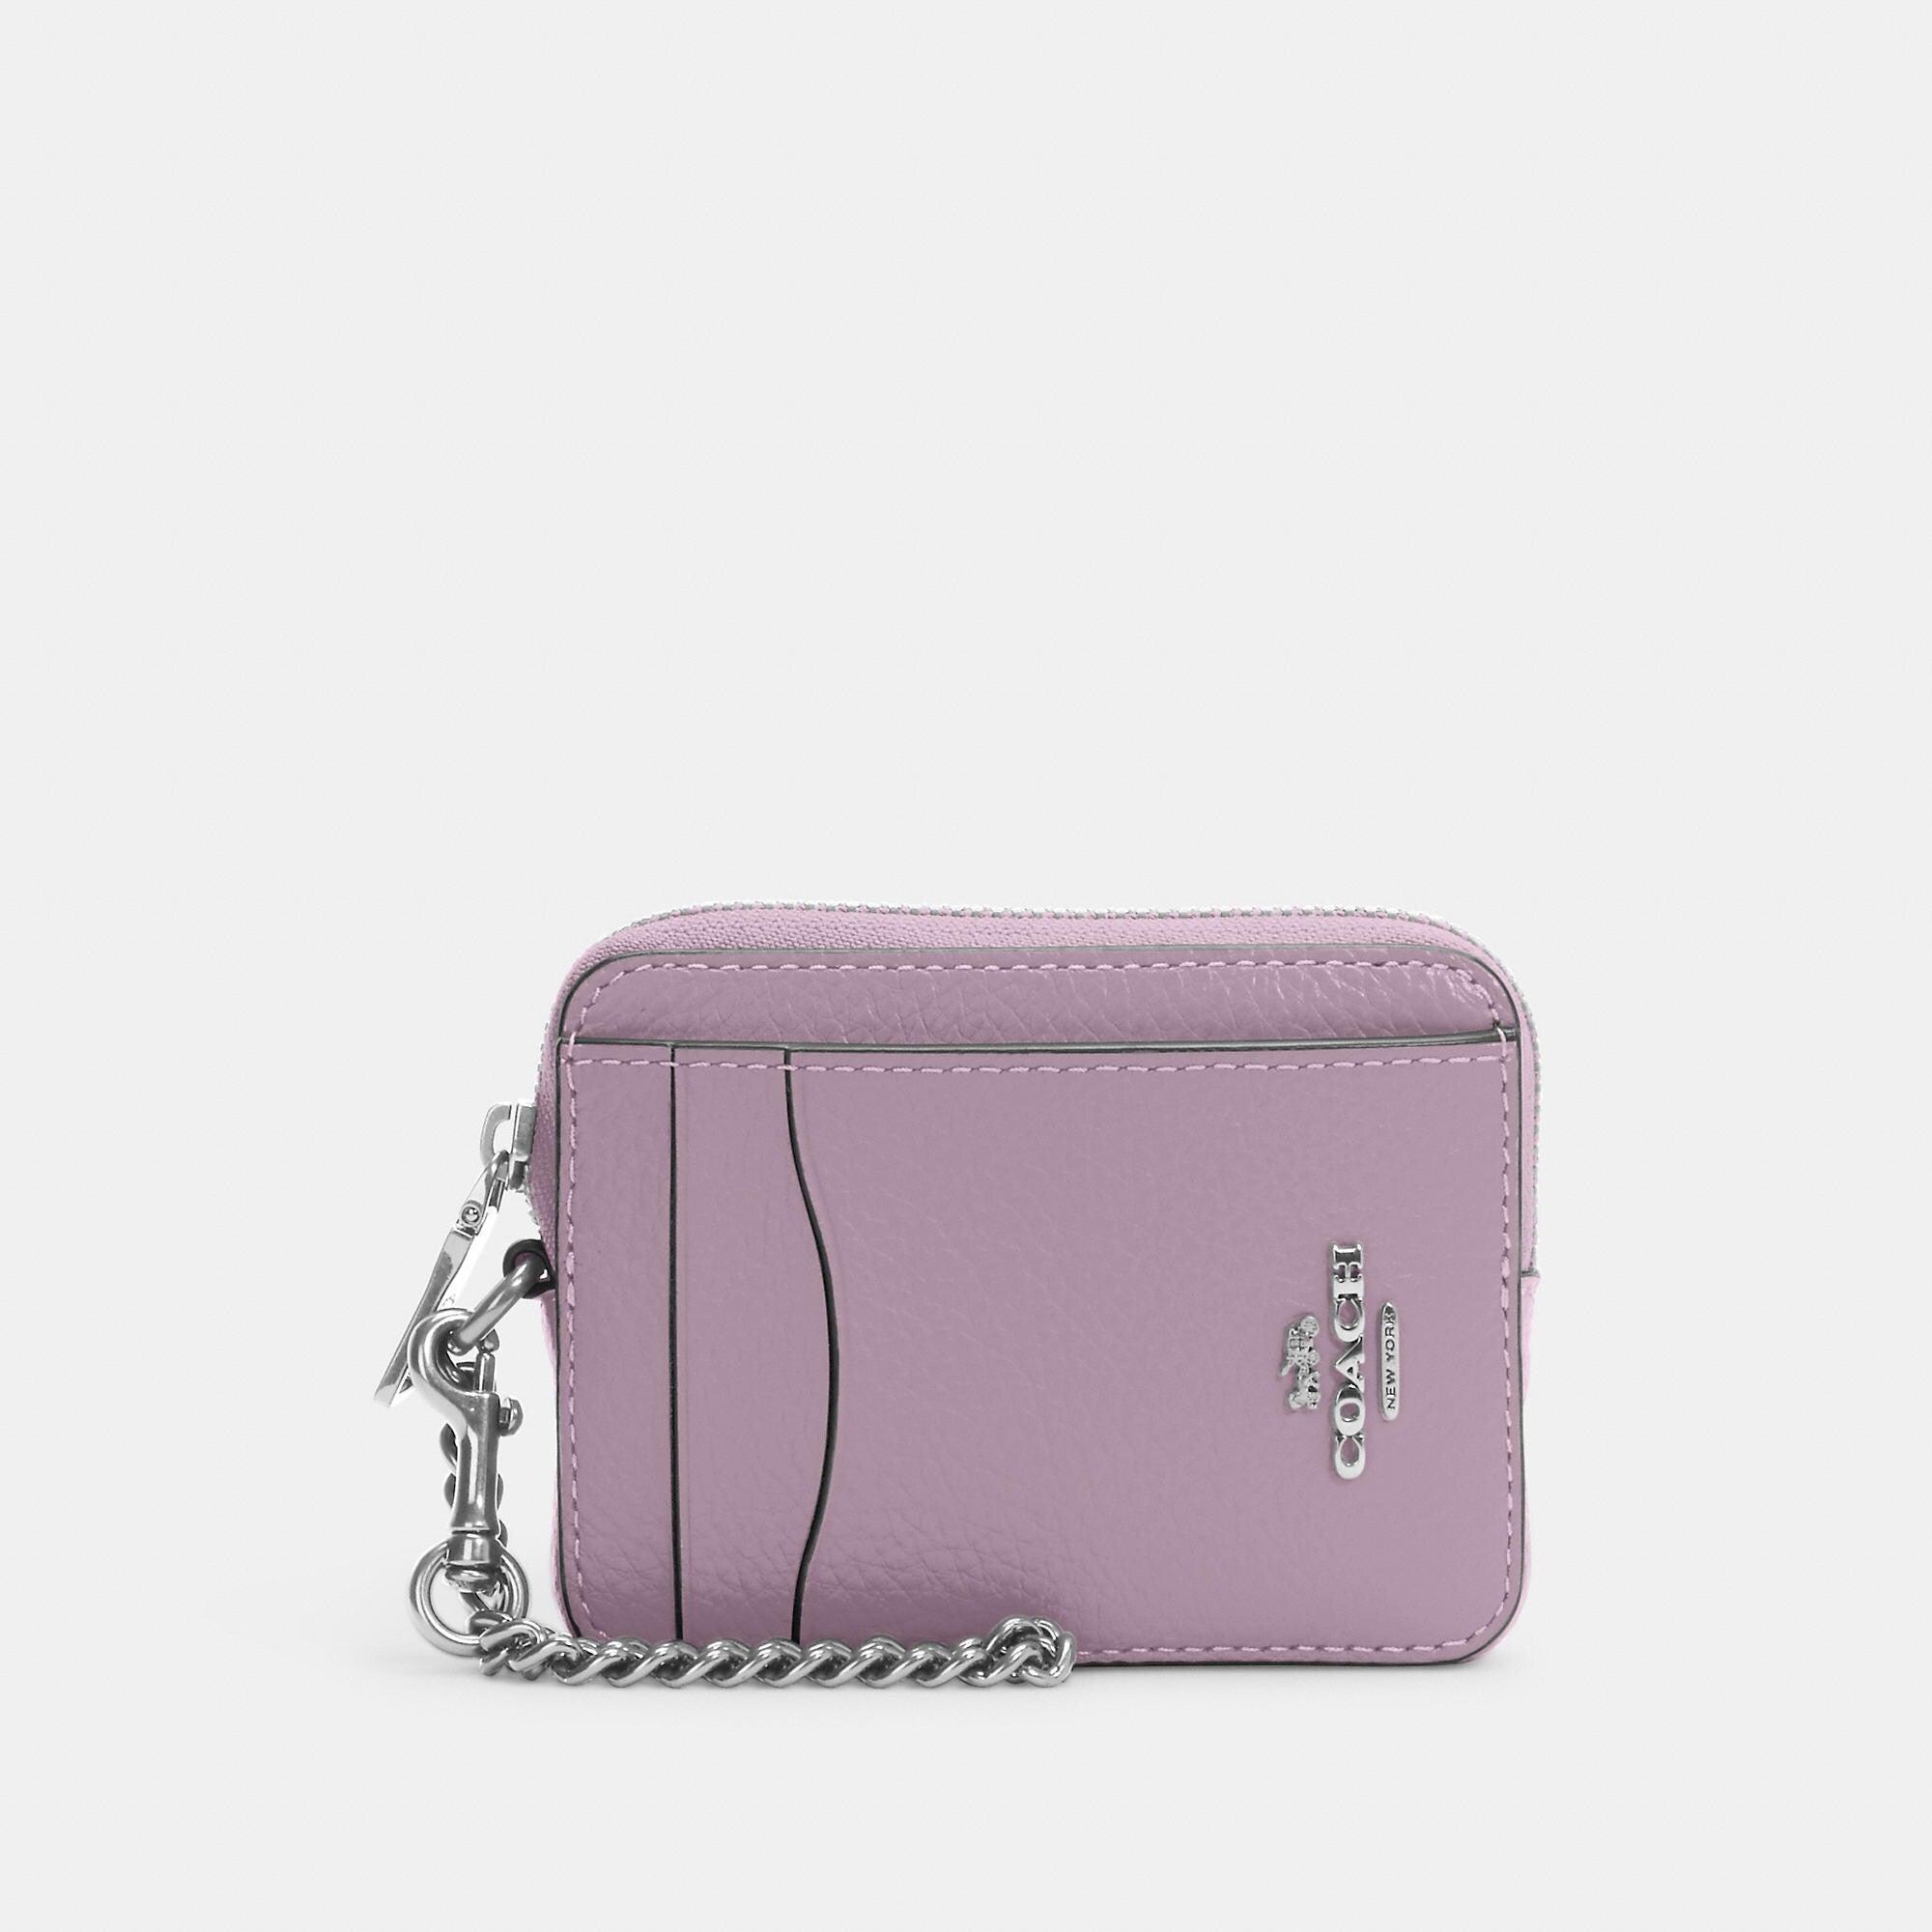 Coach Wallet Multifunction Card Case Womens Purple Leather Keyring CH162